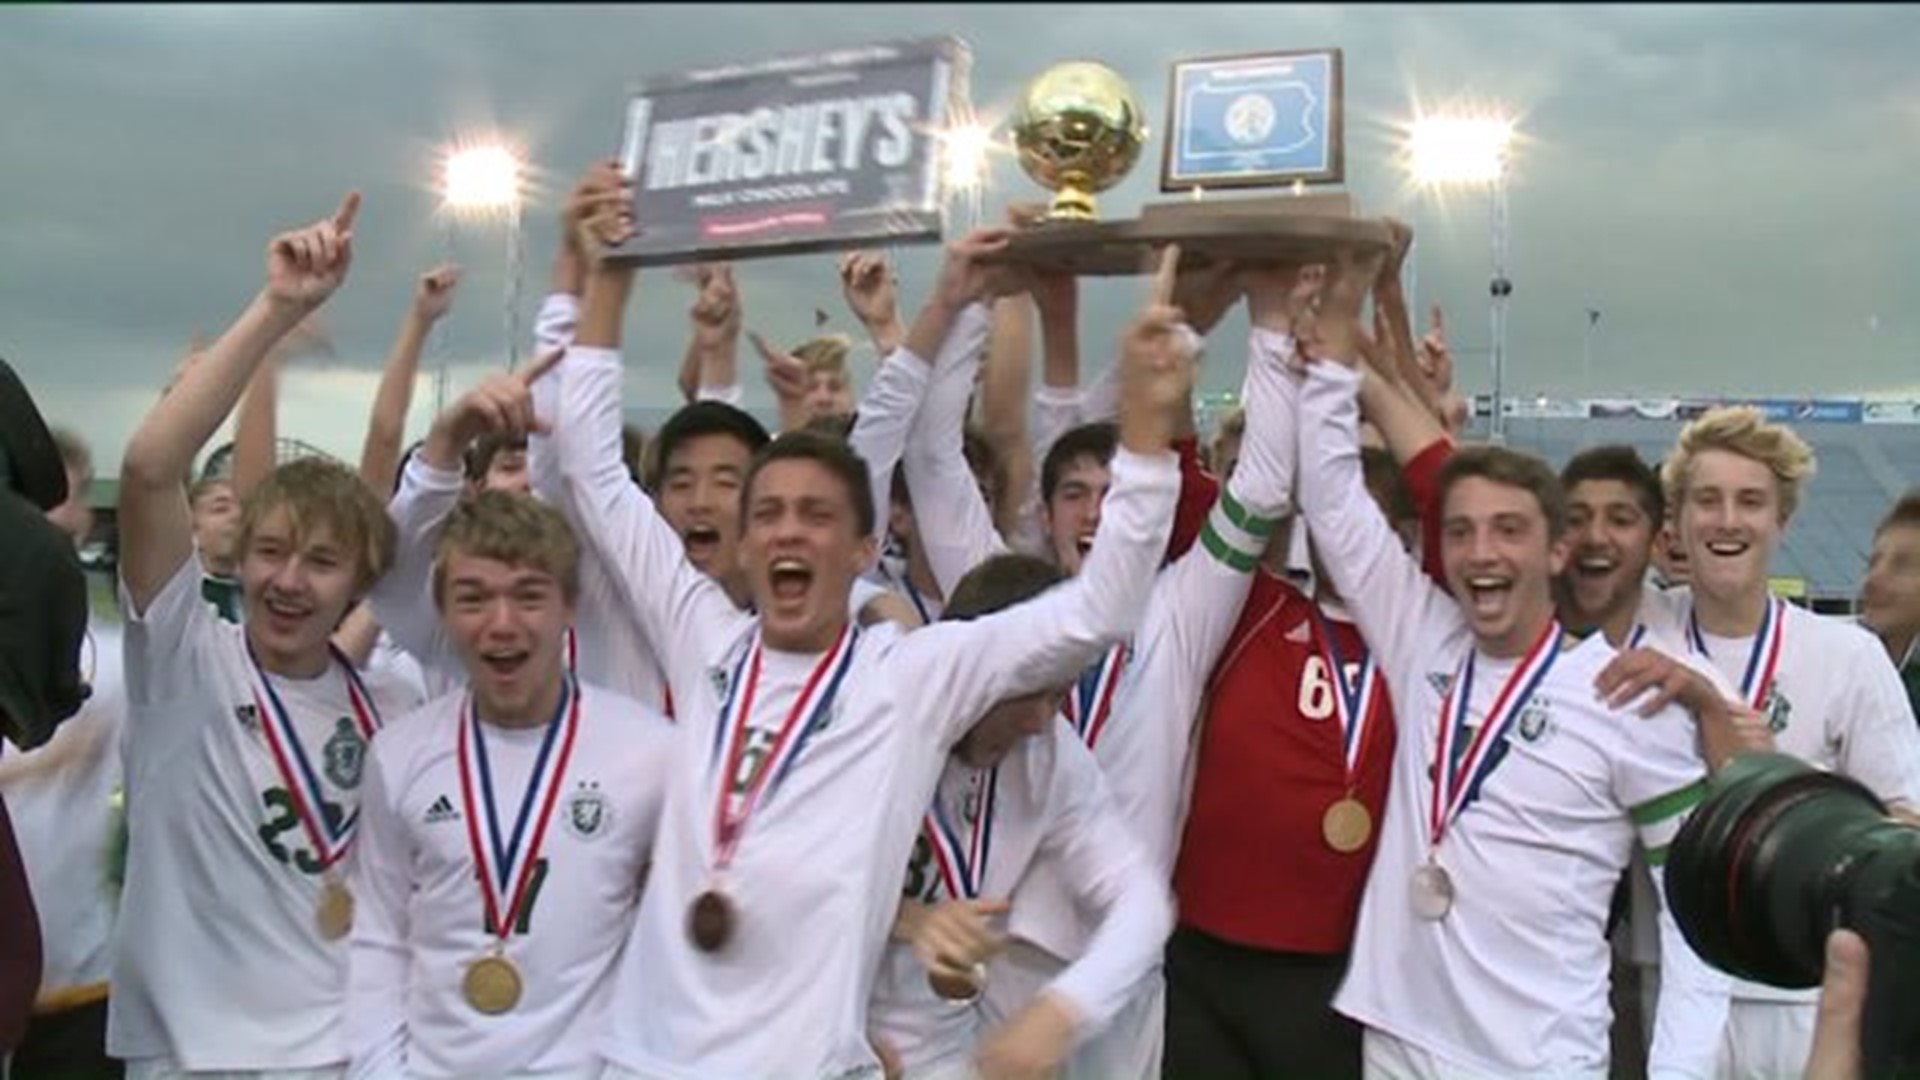 Lewisburg Repeats as State Boys Soccer Champs